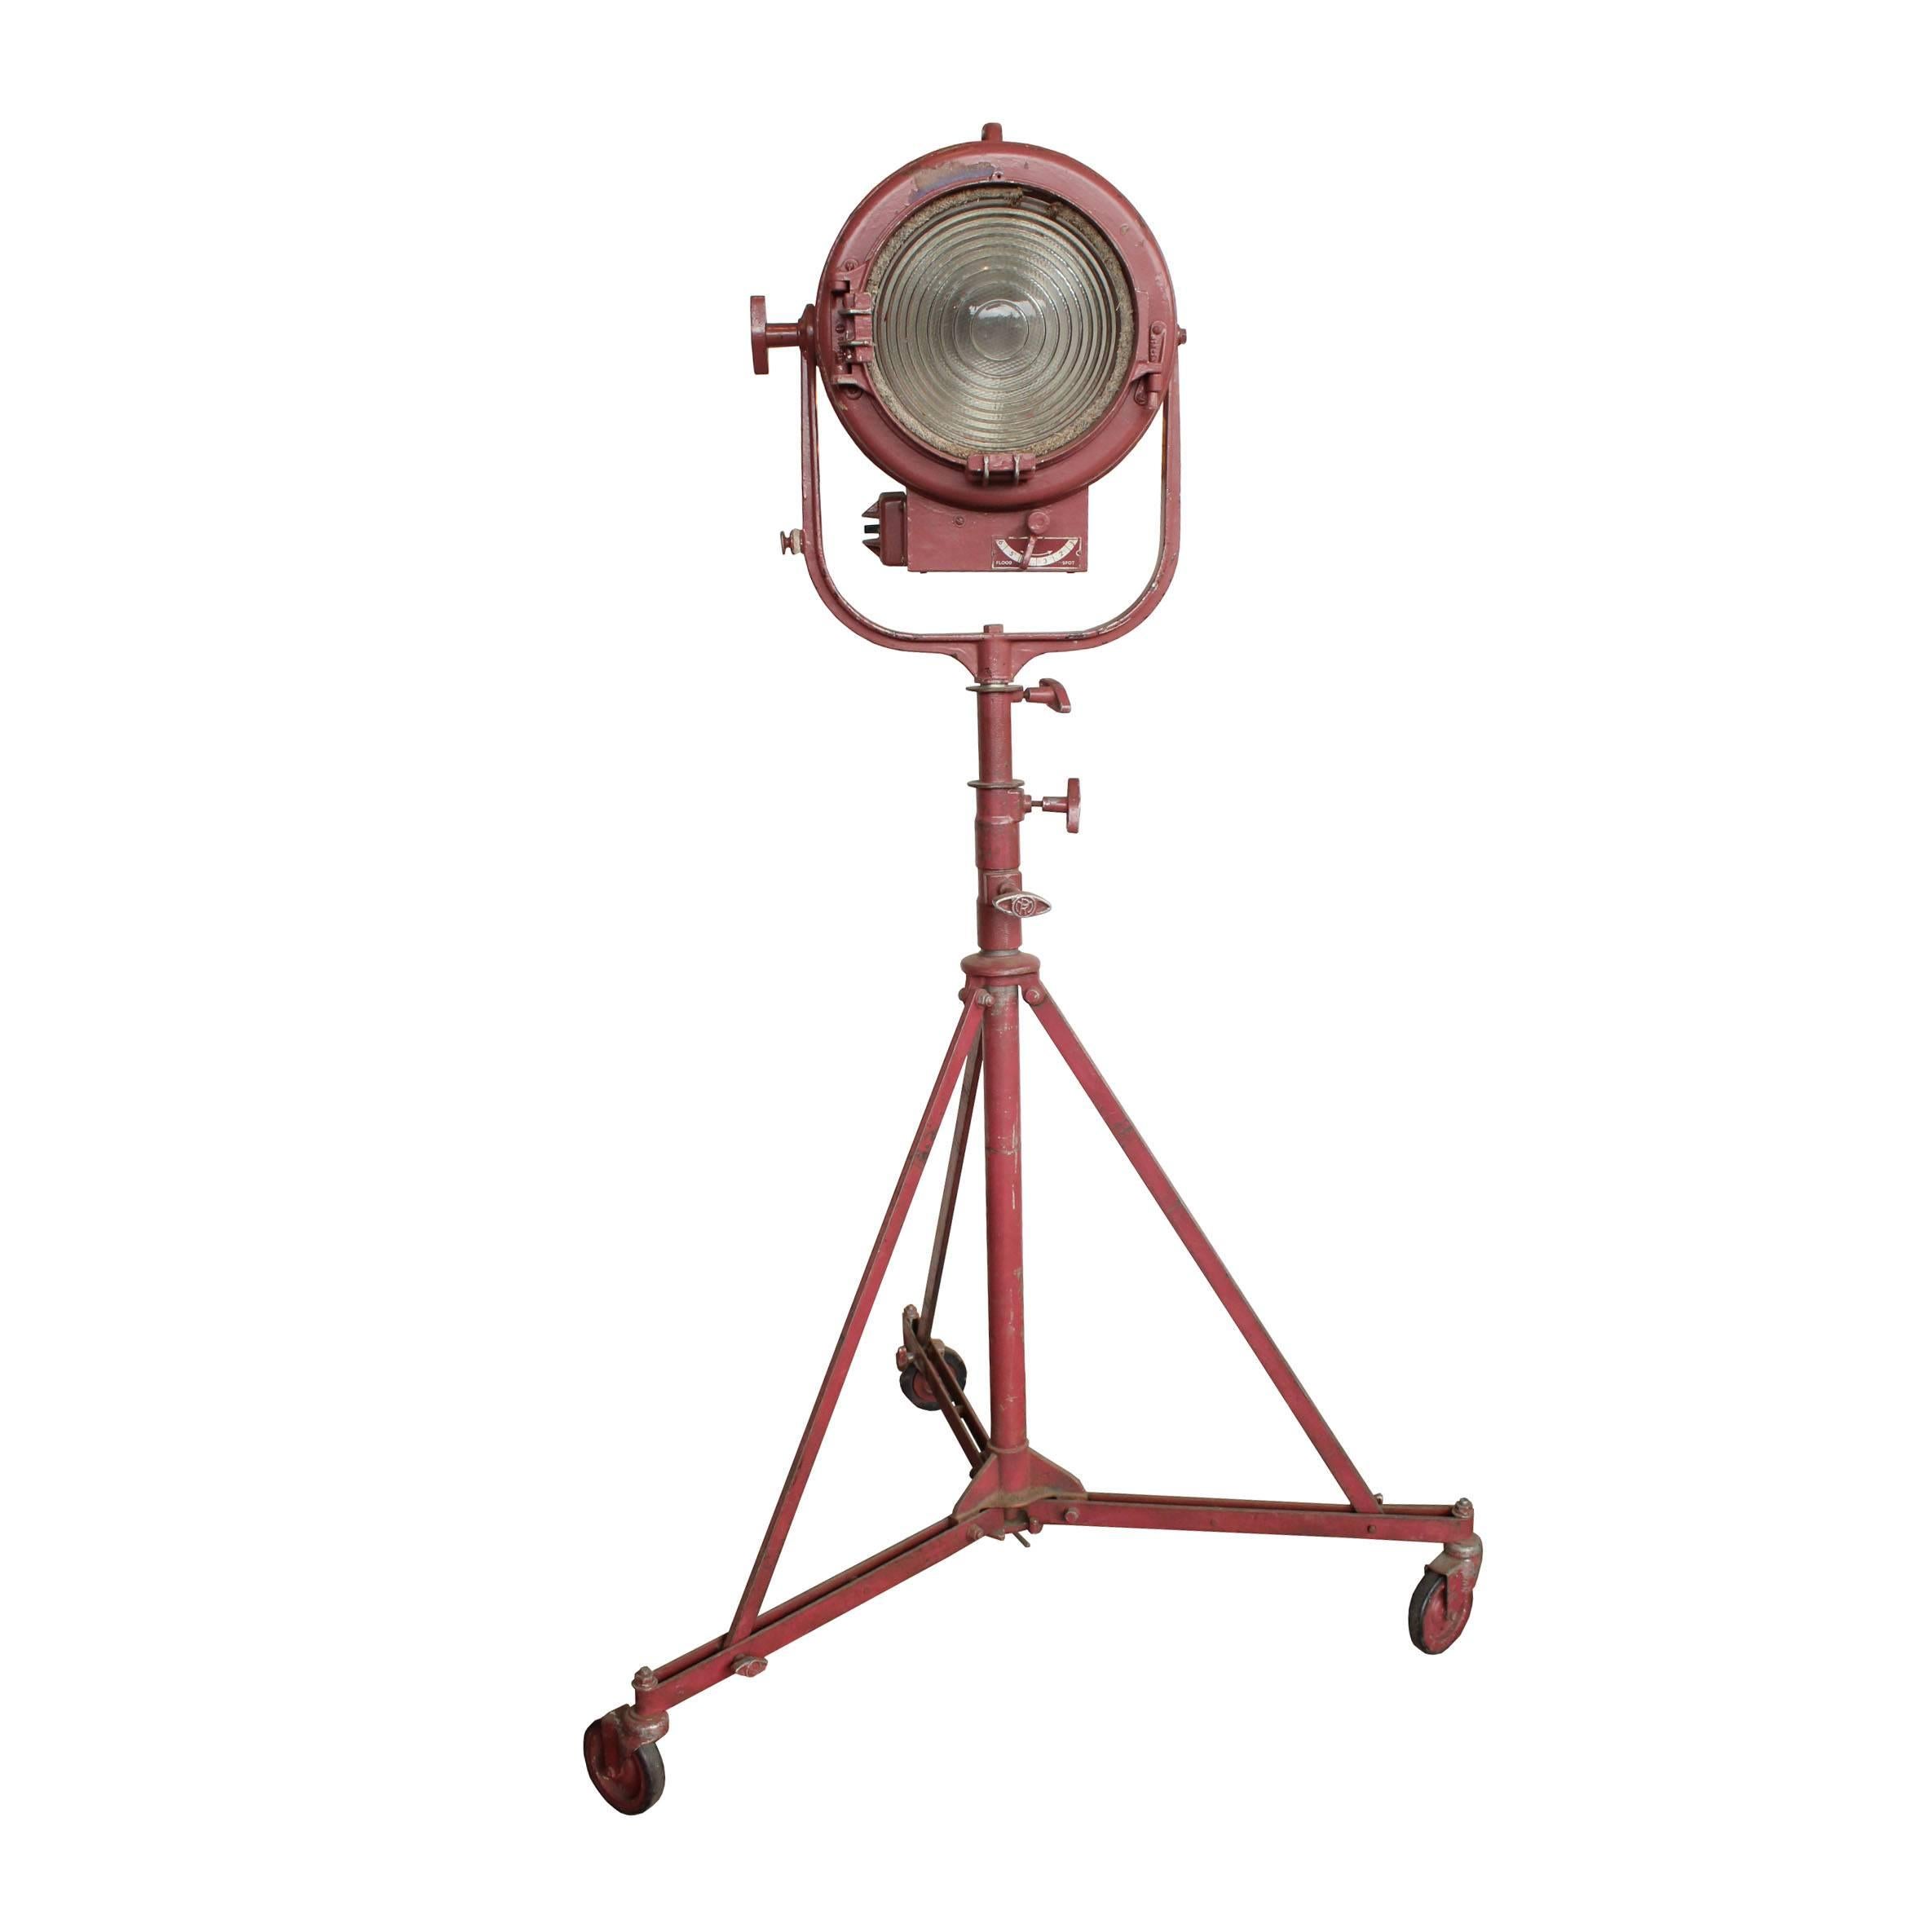 Manufactured in Hollywood, CA, in the late 1940s, these type 410 Solarspot movie spotlights stand on rolling tripods. There is a slight variation between the two lights in their manufacturer's marking and handles. Compatible with 1000 W bi-post